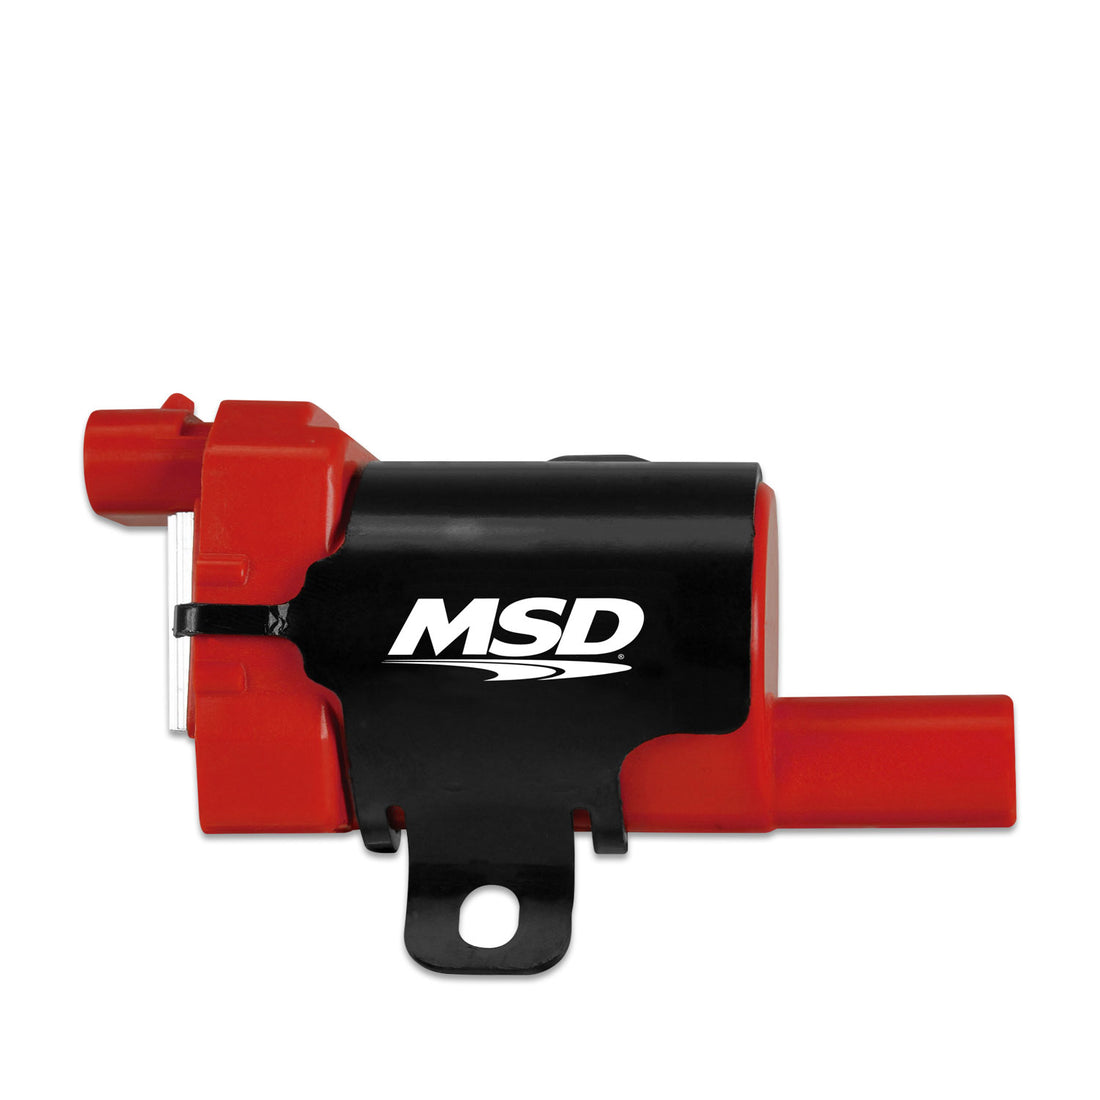 MSD Ignition Coil - GM LS Blaster Series - L-Series Truck Engine - Red